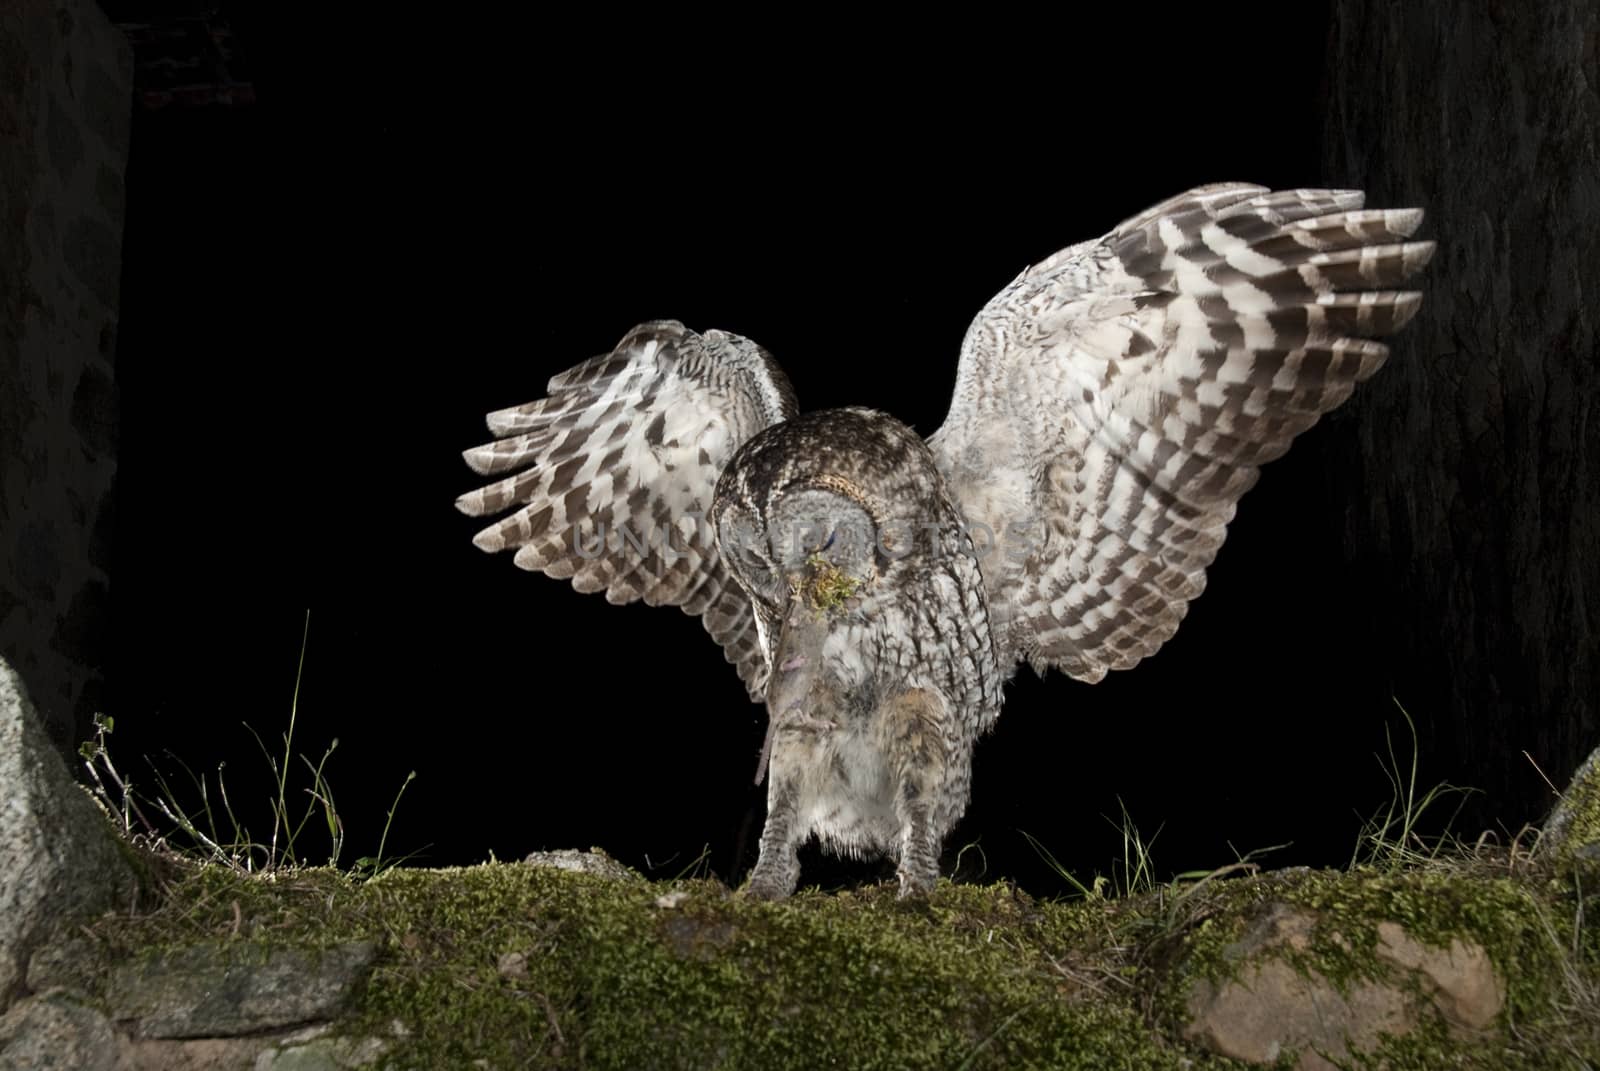 A Tawny owl, hunting mouse, rural environment, flying by jalonsohu@gmail.com